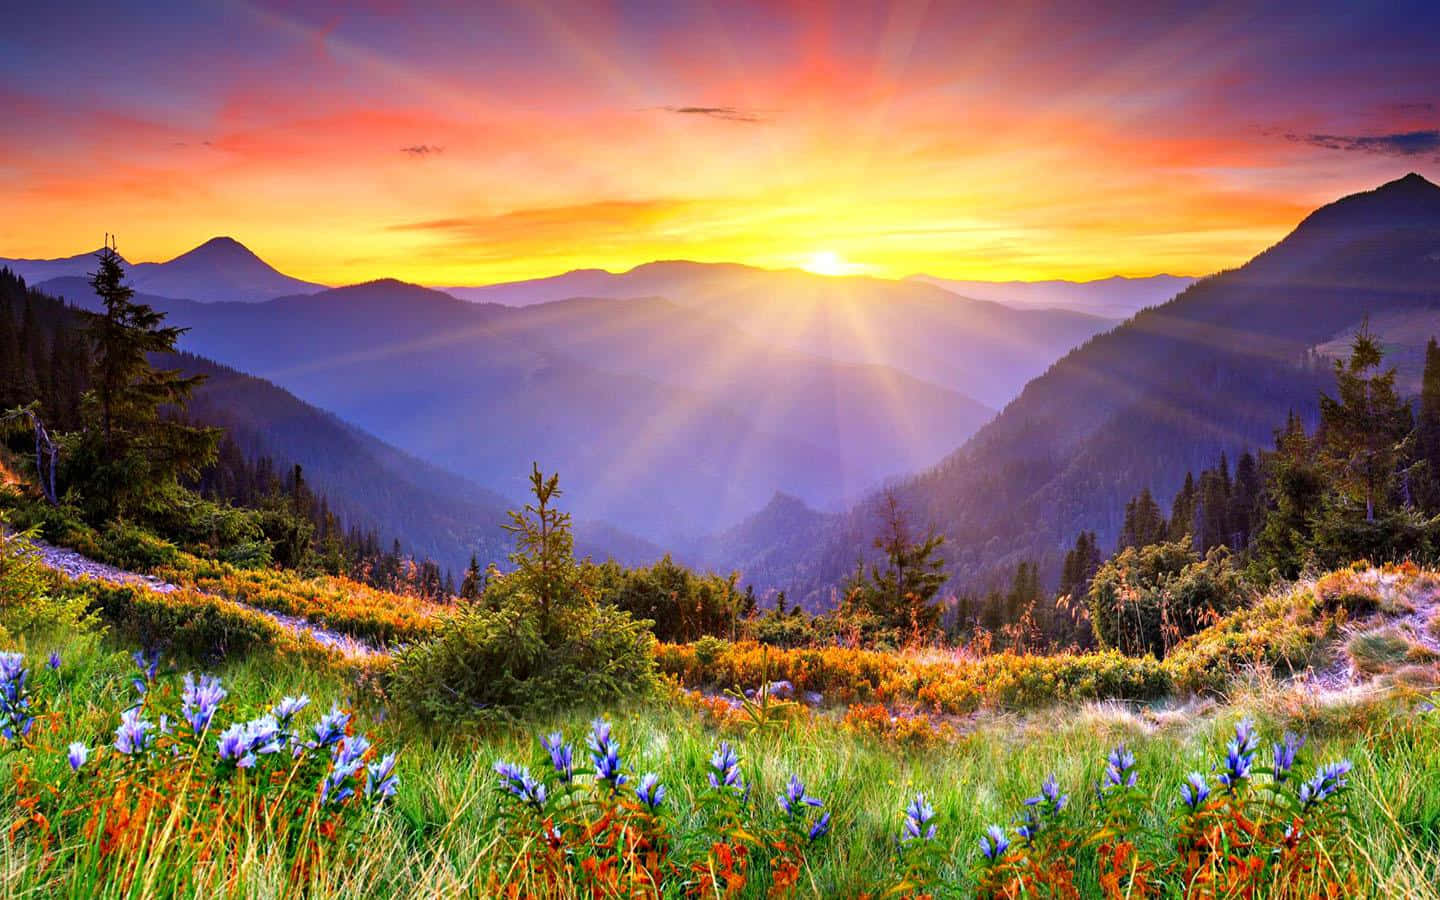 Enjoy the view of a beautiful sunrise on your desktop! Wallpaper